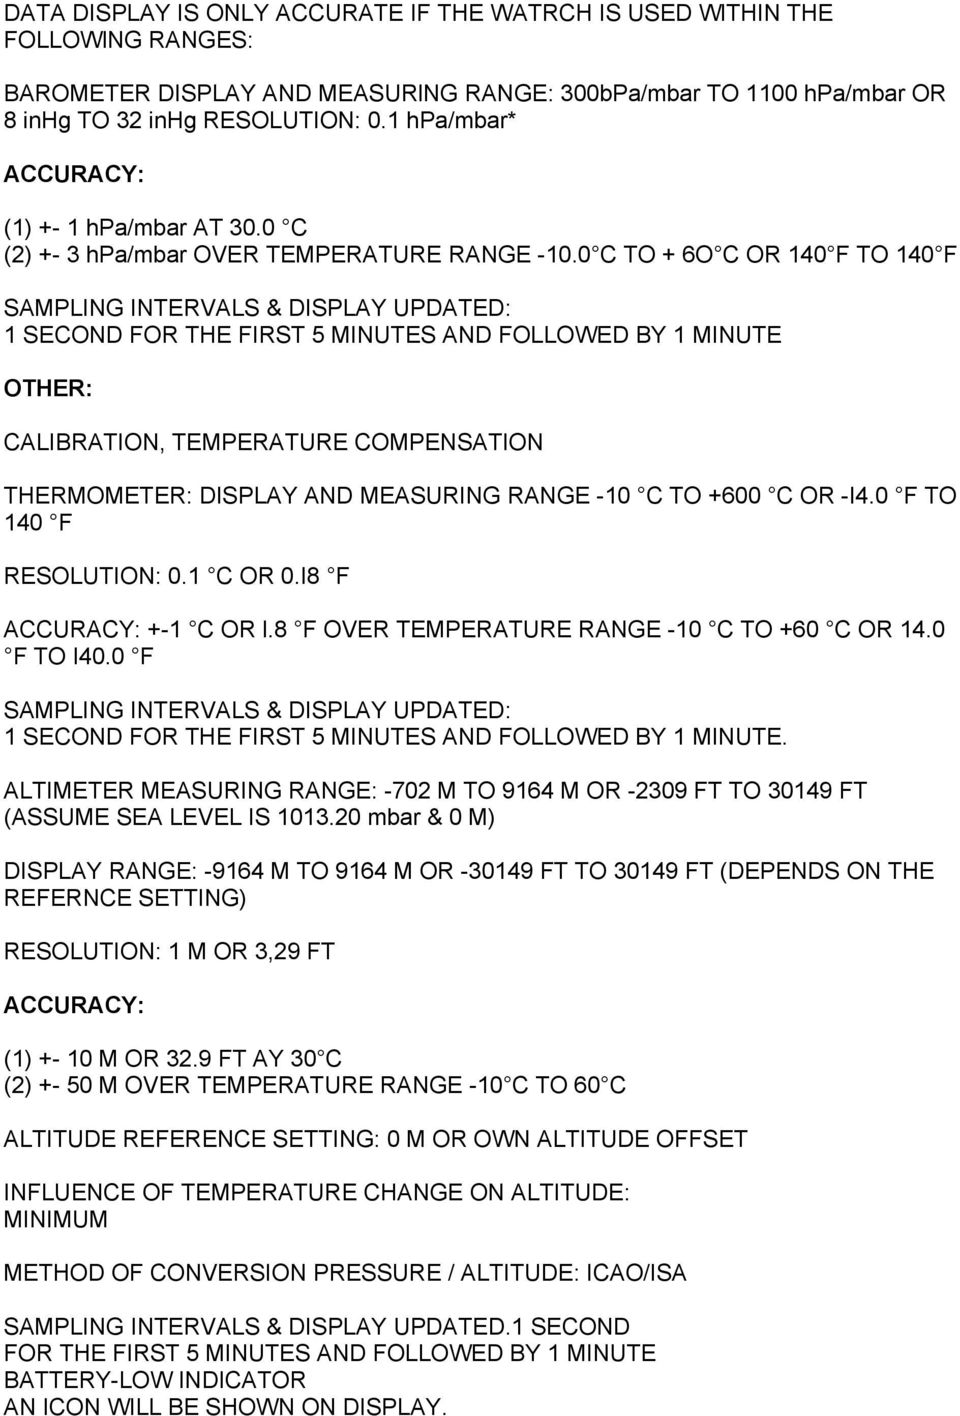 0 C TO + 6O C OR 140 F TO 140 F SAMPLING INTERVALS & DISPLAY UPDATED: 1 SECOND FOR THE FIRST 5 MINUTES AND FOLLOWED BY 1 MINUTE OTHER: CALIBRATION, TEMPERATURE COMPENSATION THERMOMETER: DISPLAY AND